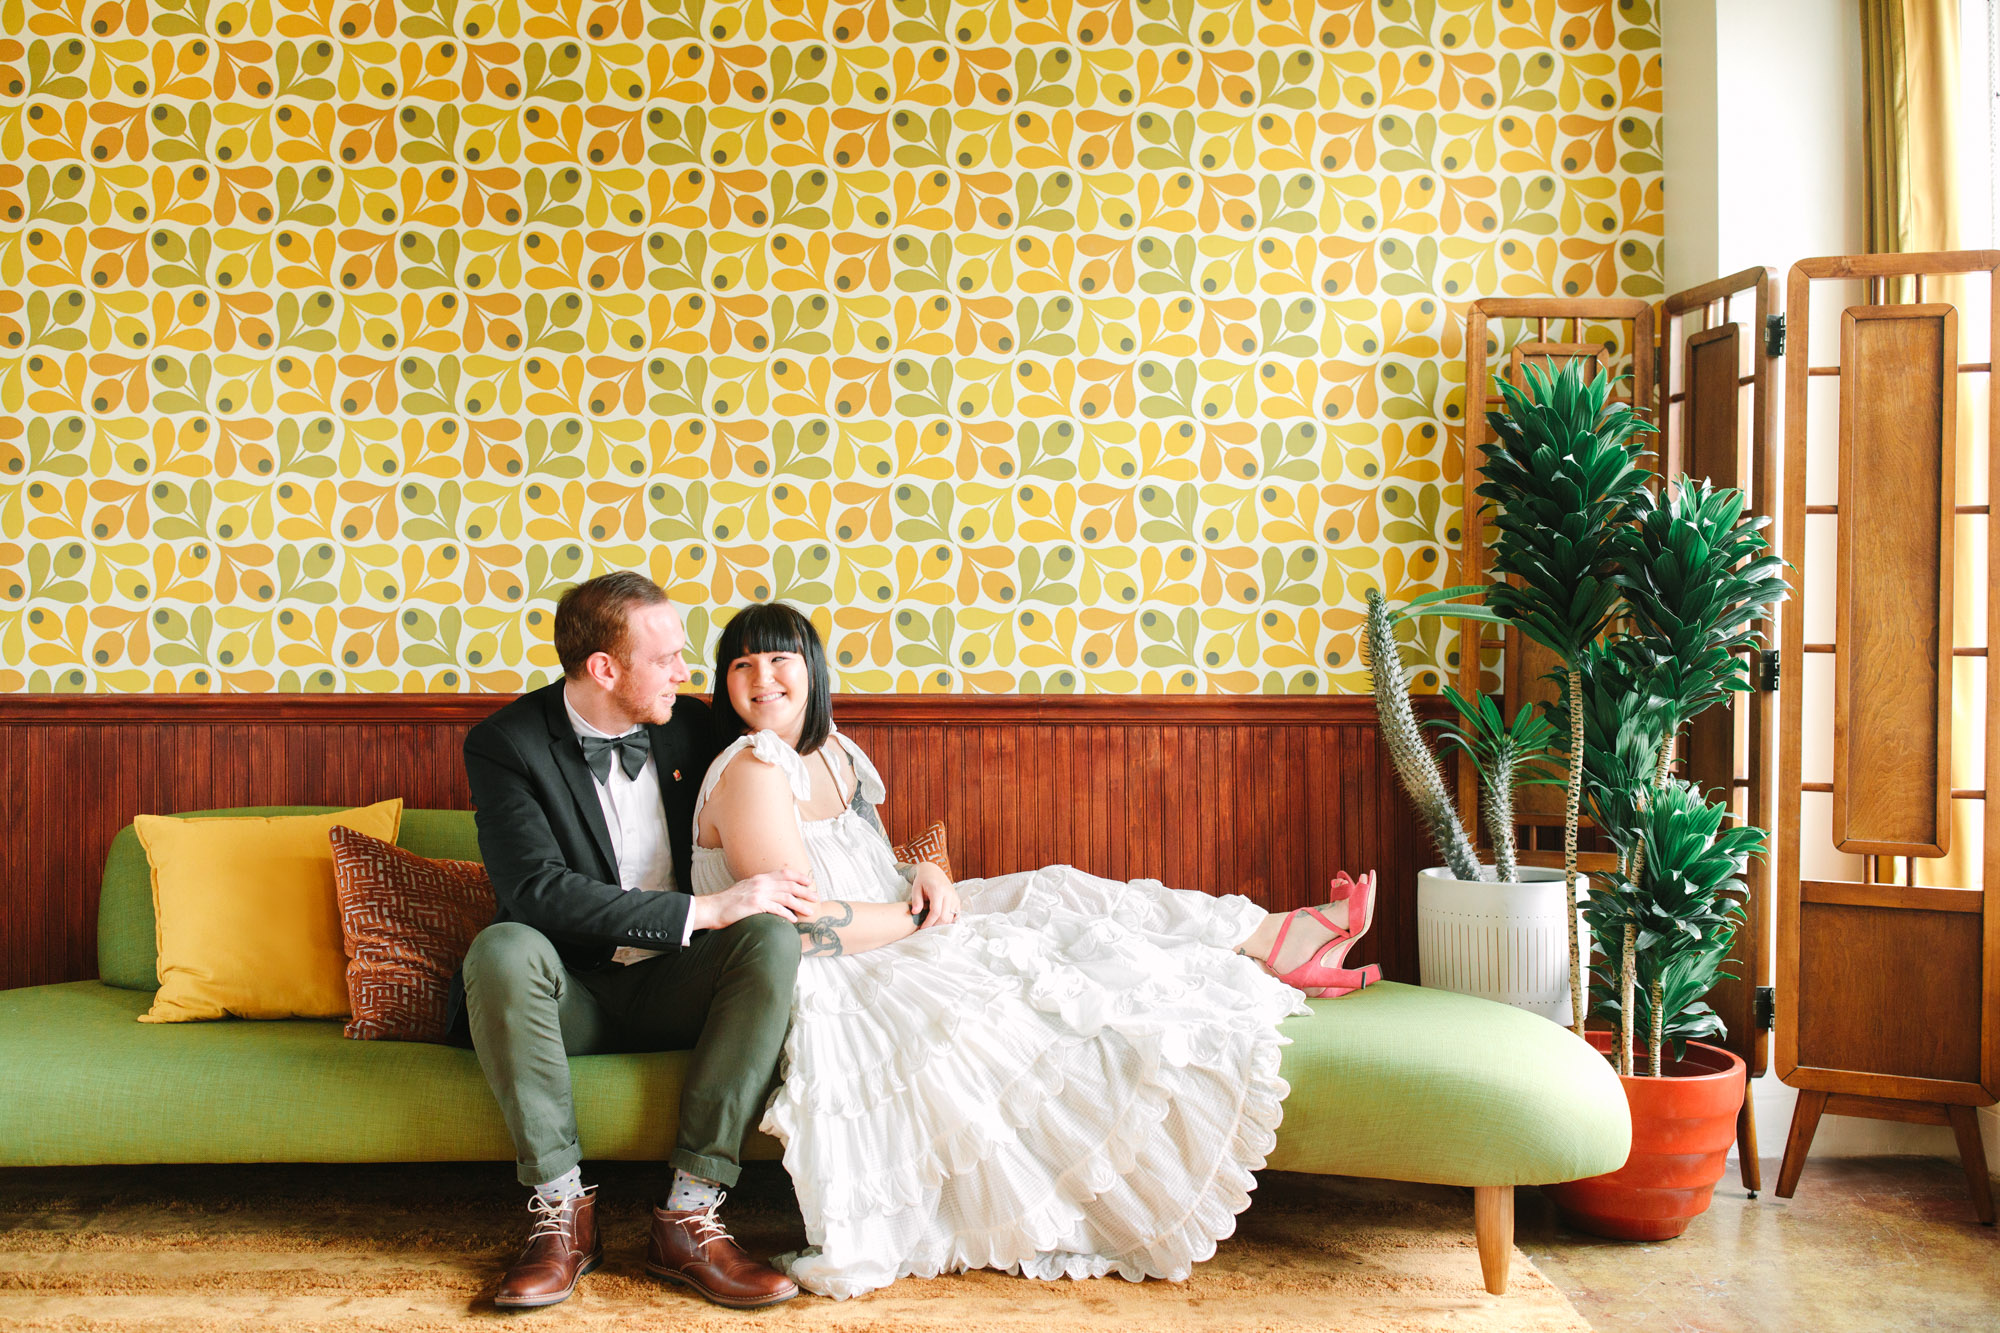 CouCouple on Mid Century Modern couch in retro room www.marycostaweddings.com